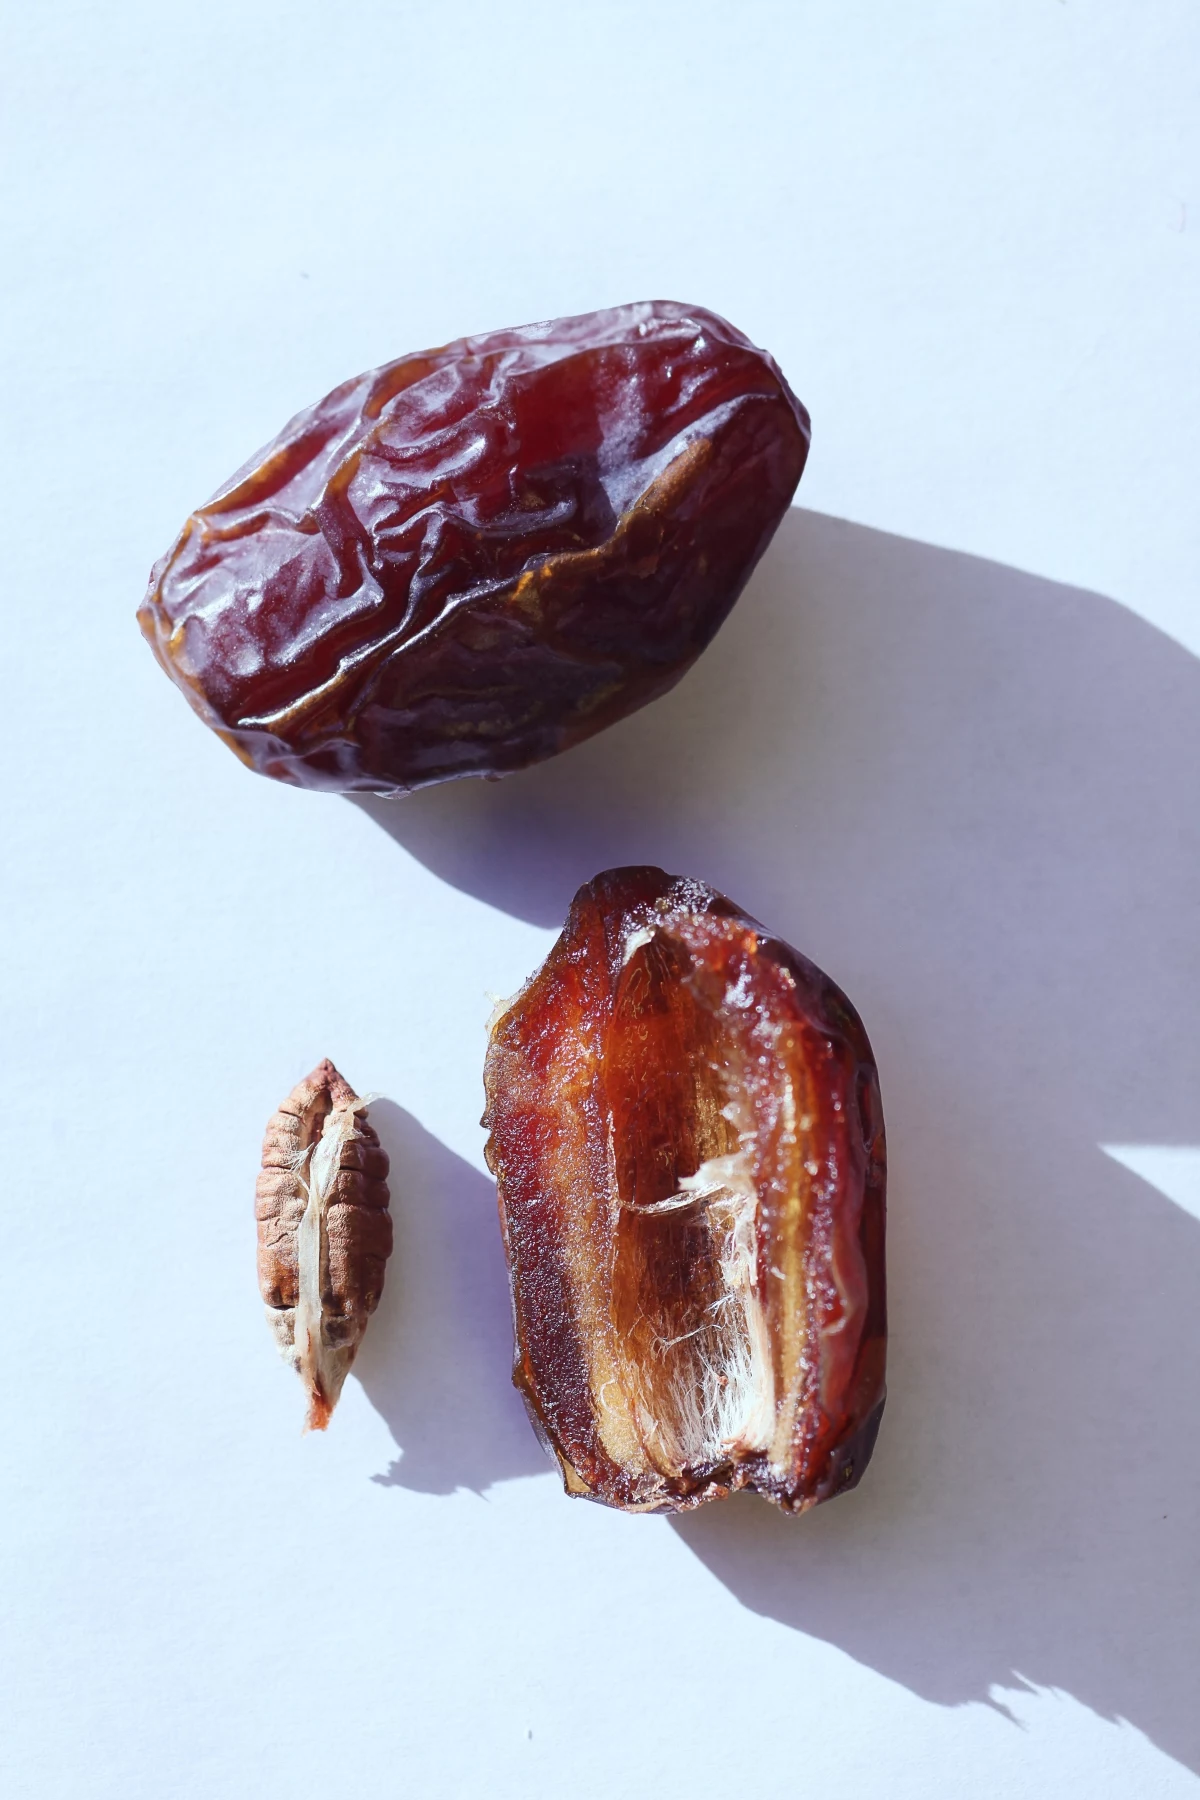 are dates a good snack for diabetics